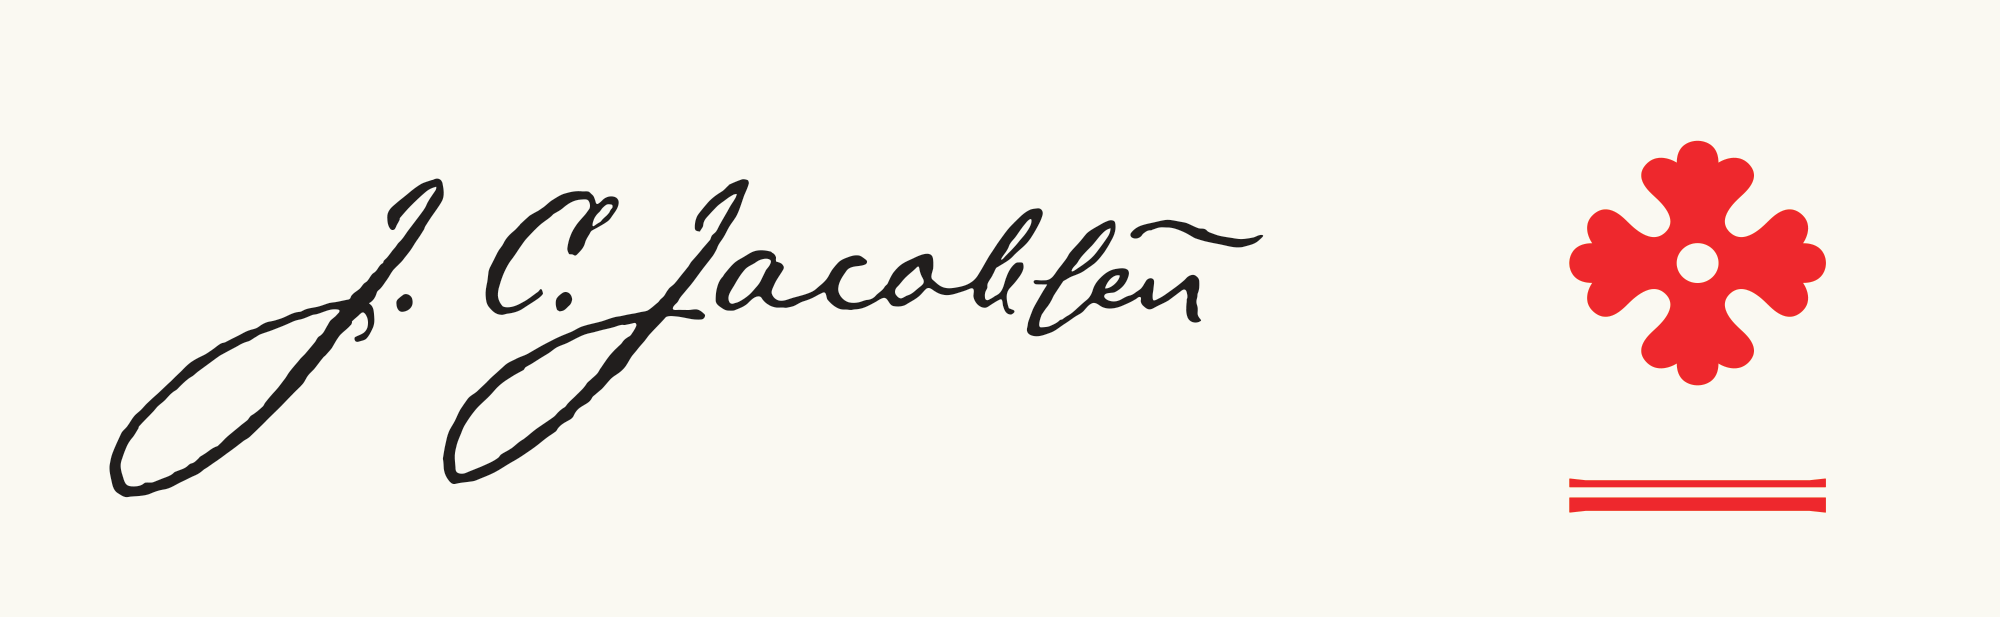 New Logo, Identity, and Packaging for Jacobsen by Montdor